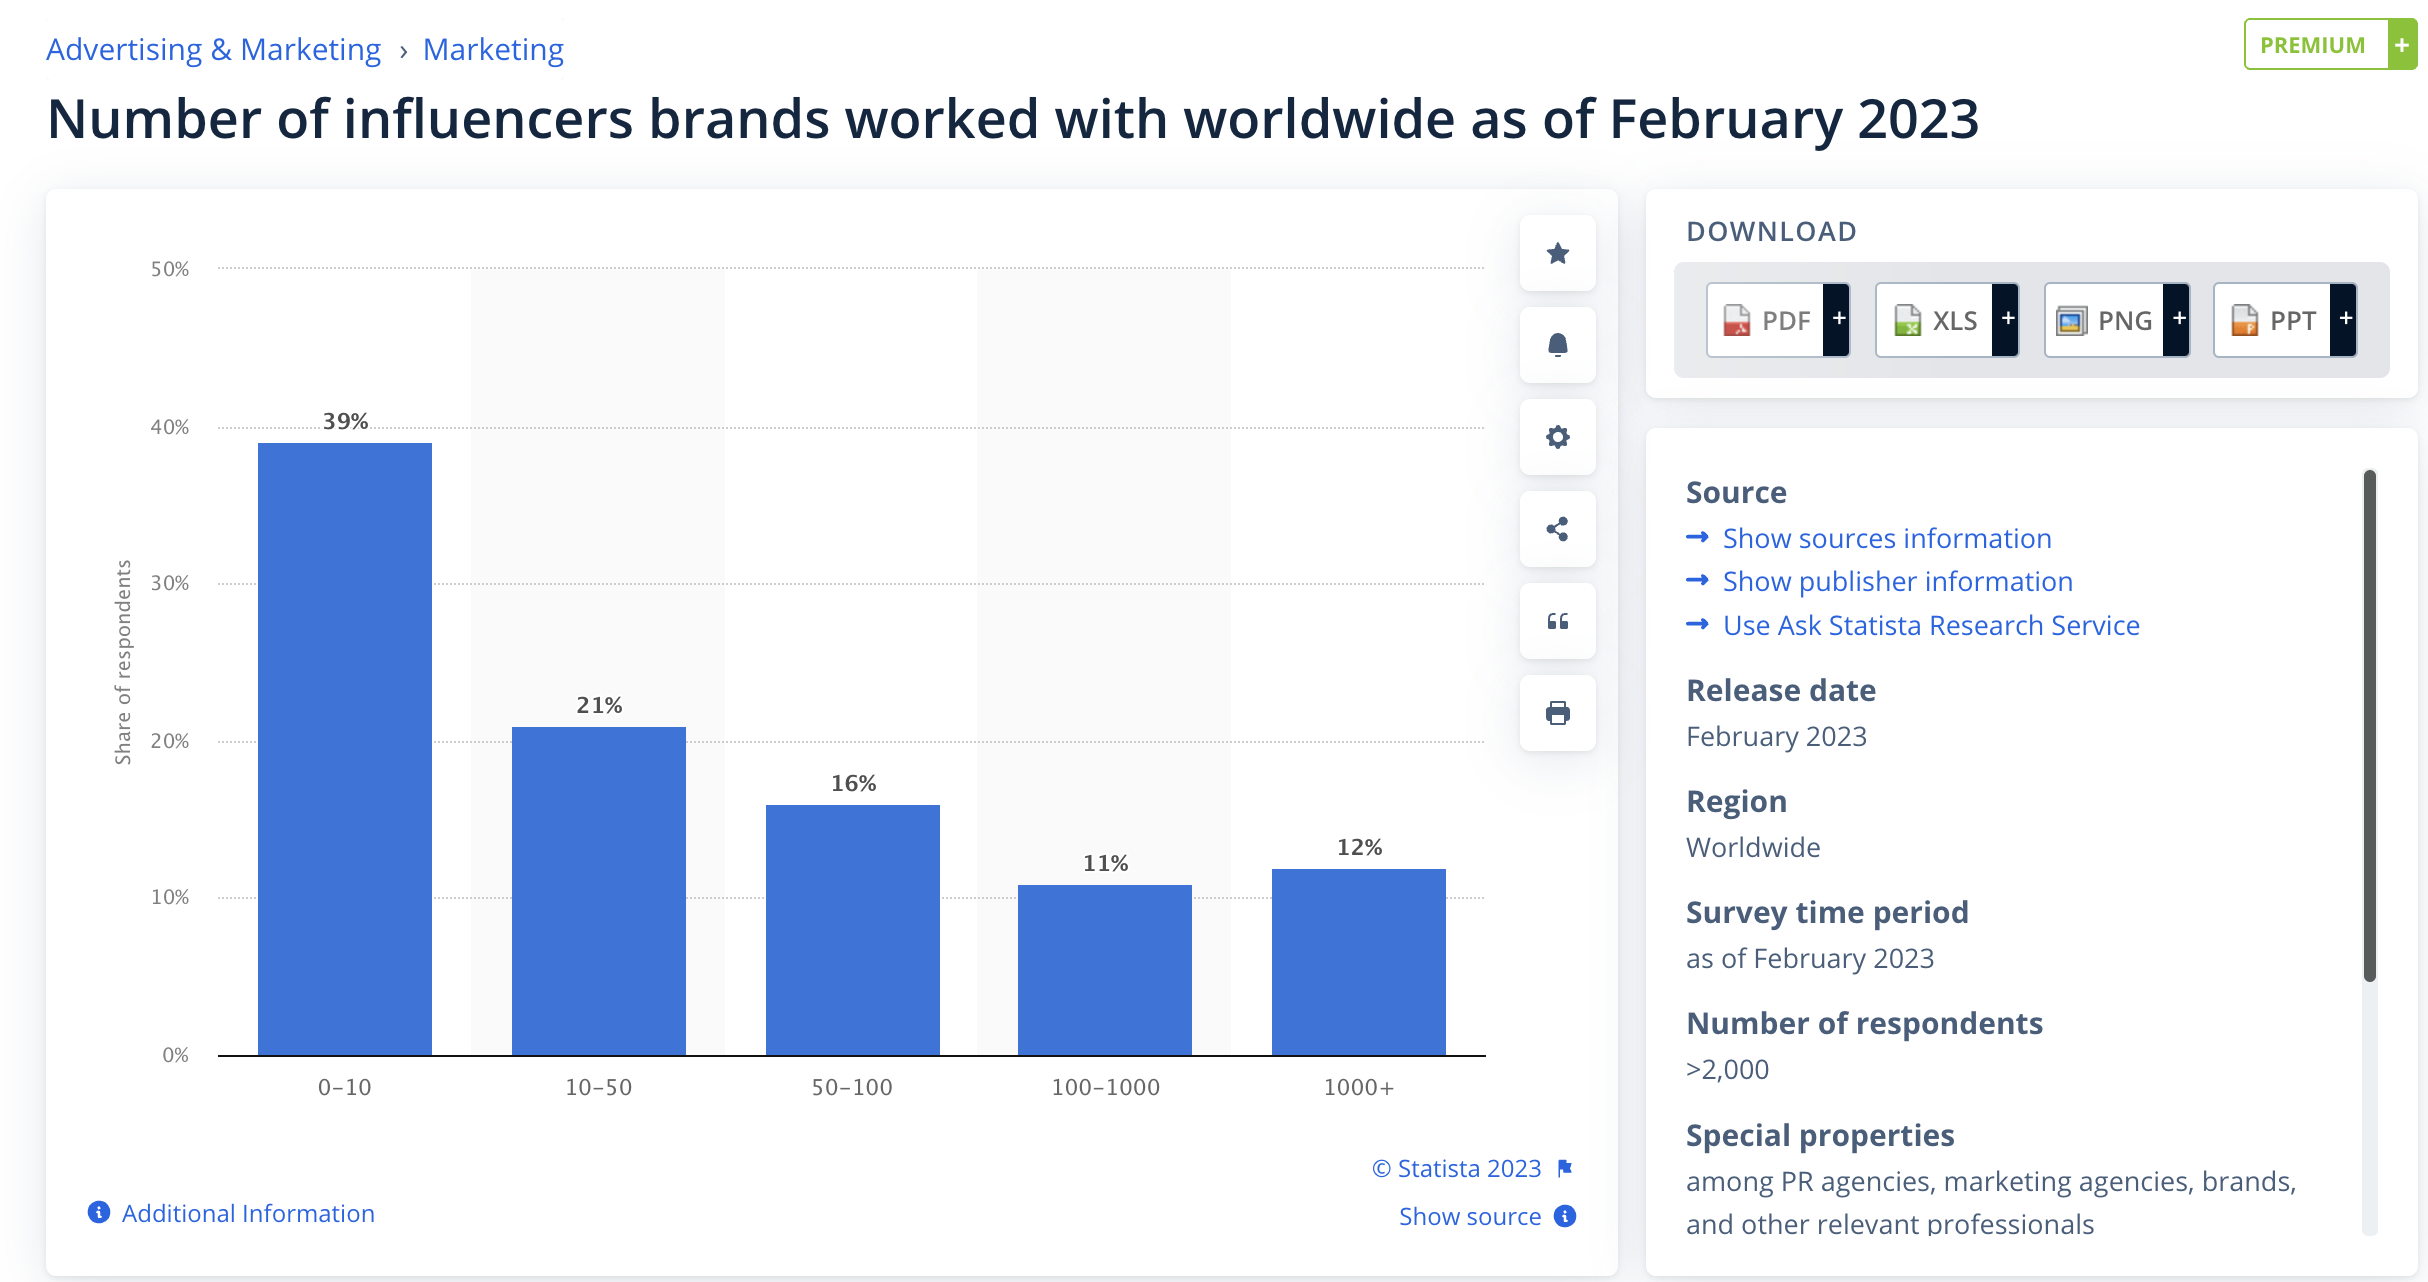 Screenshot from Statista showing the number of influencers brands worked with worldwide as of February 2023